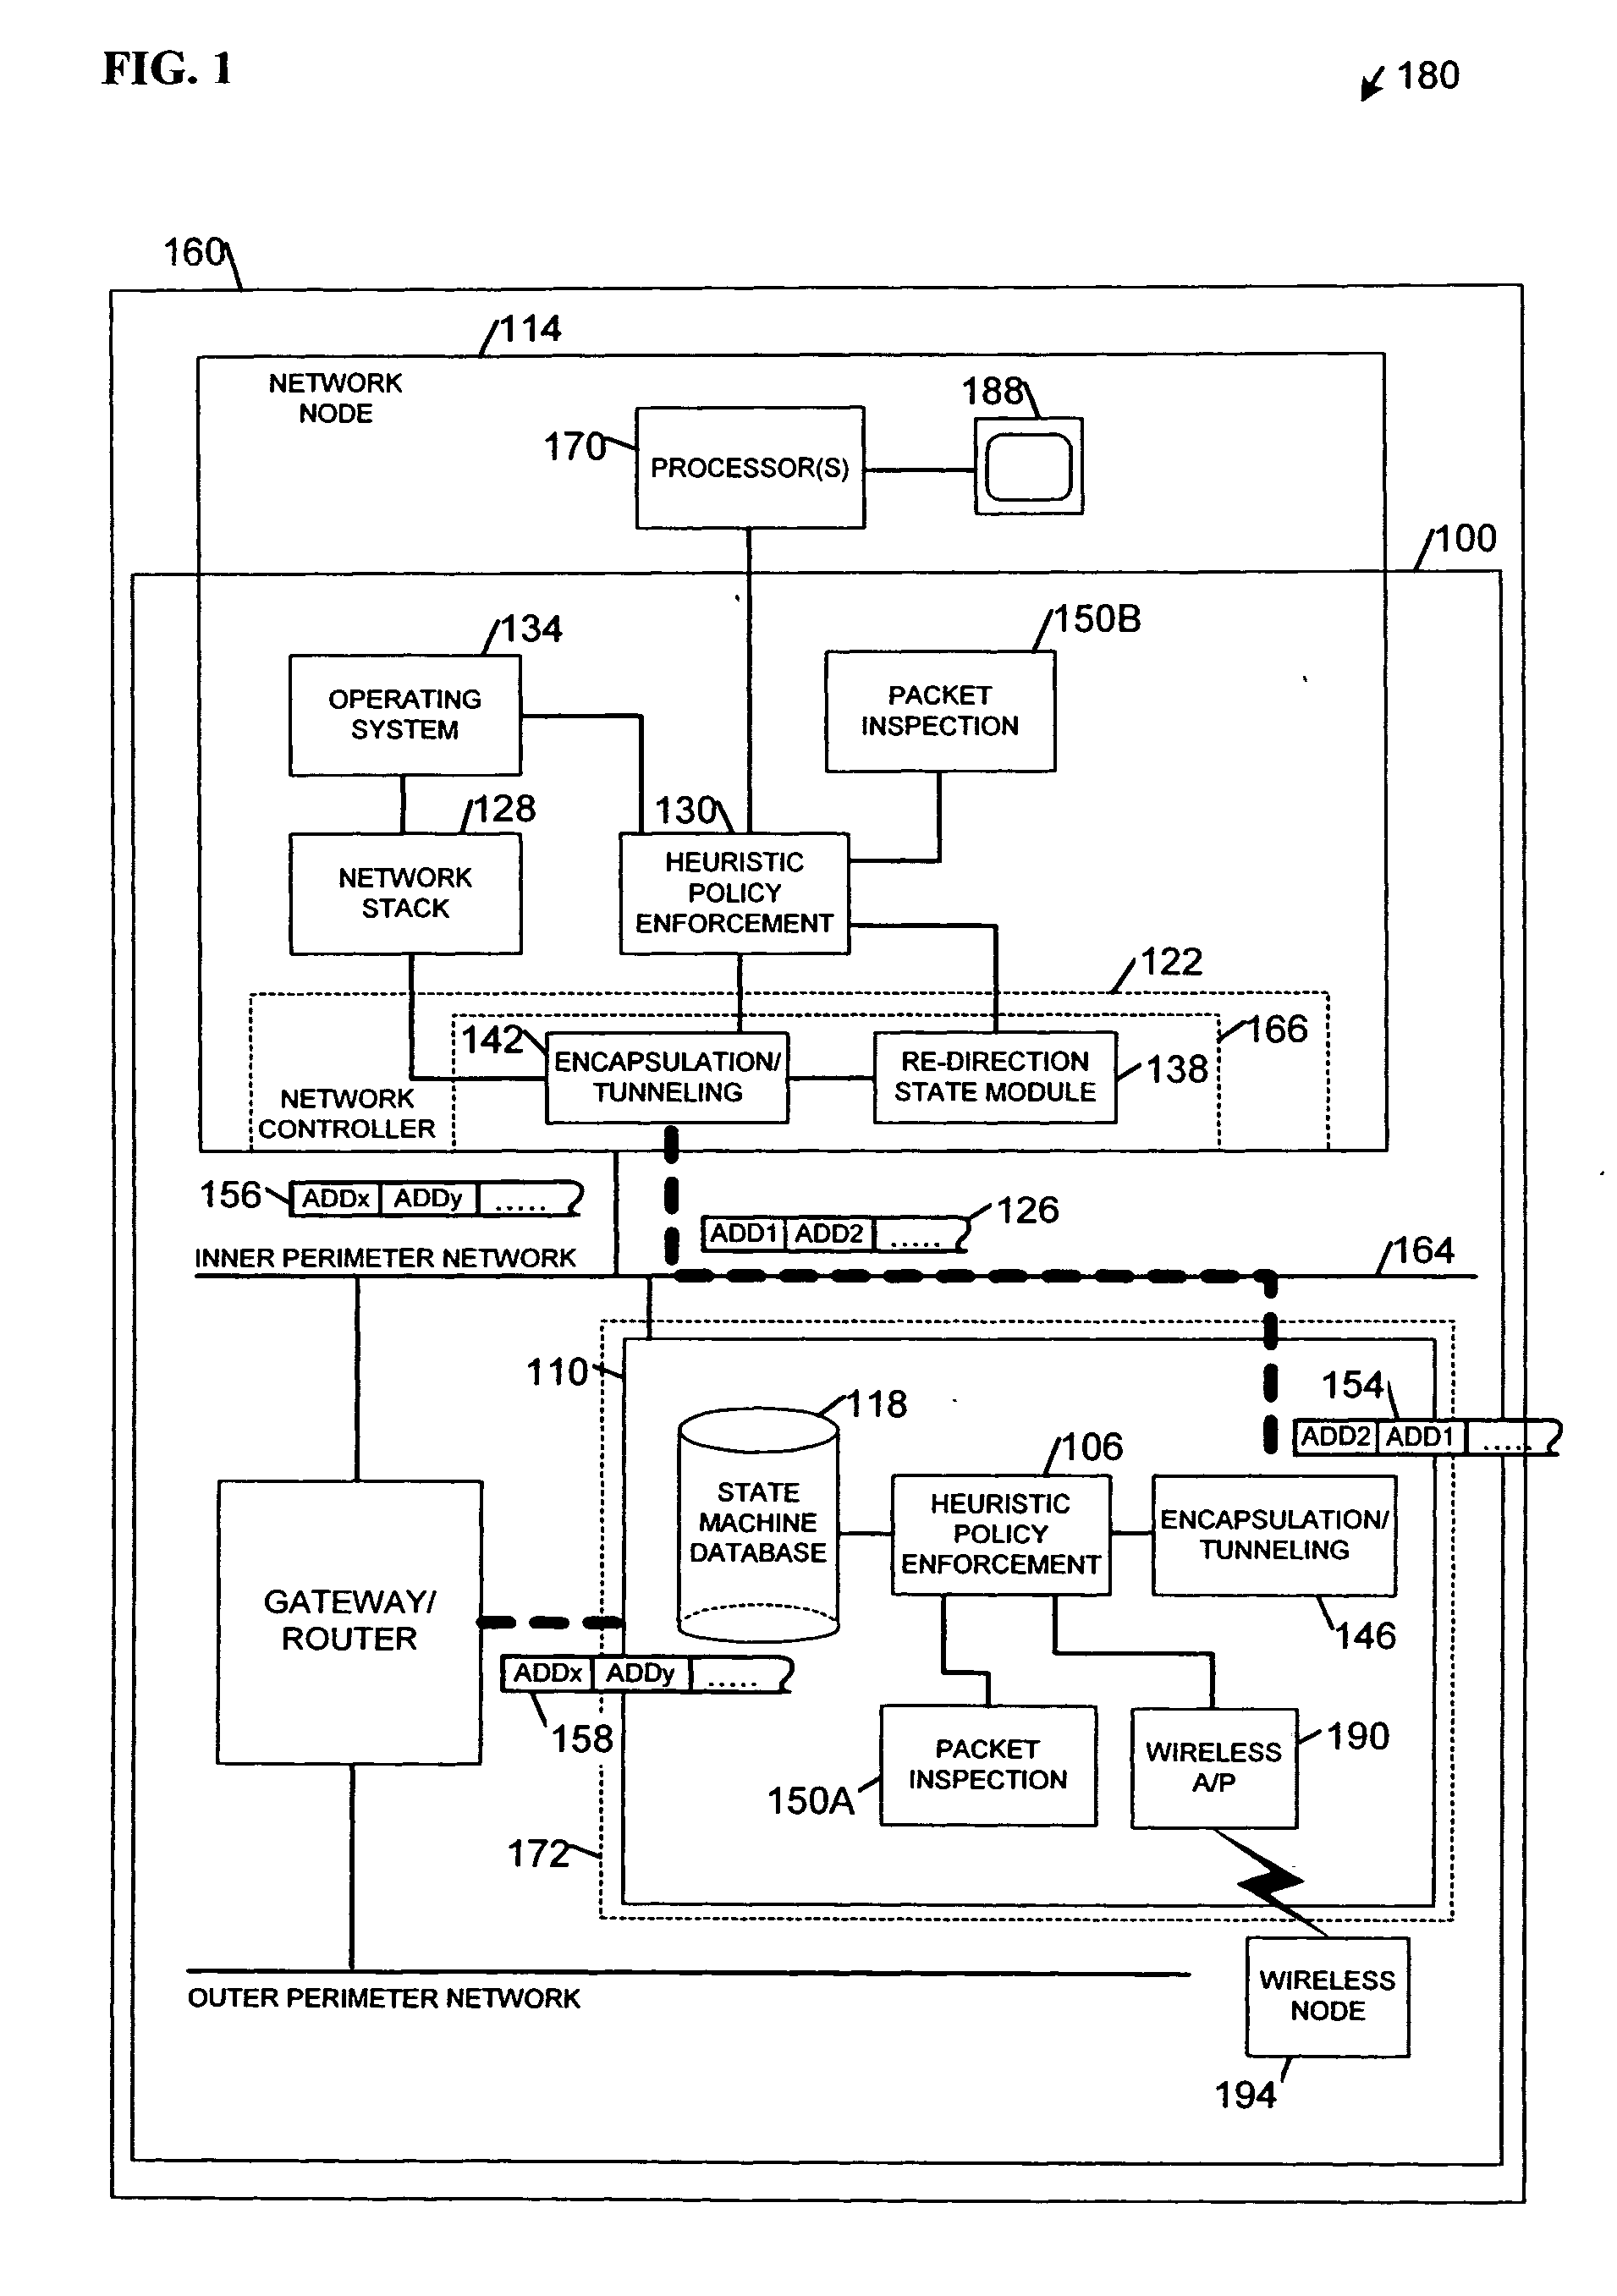 Hybrid distributed firewall apparatus, systems, and methods